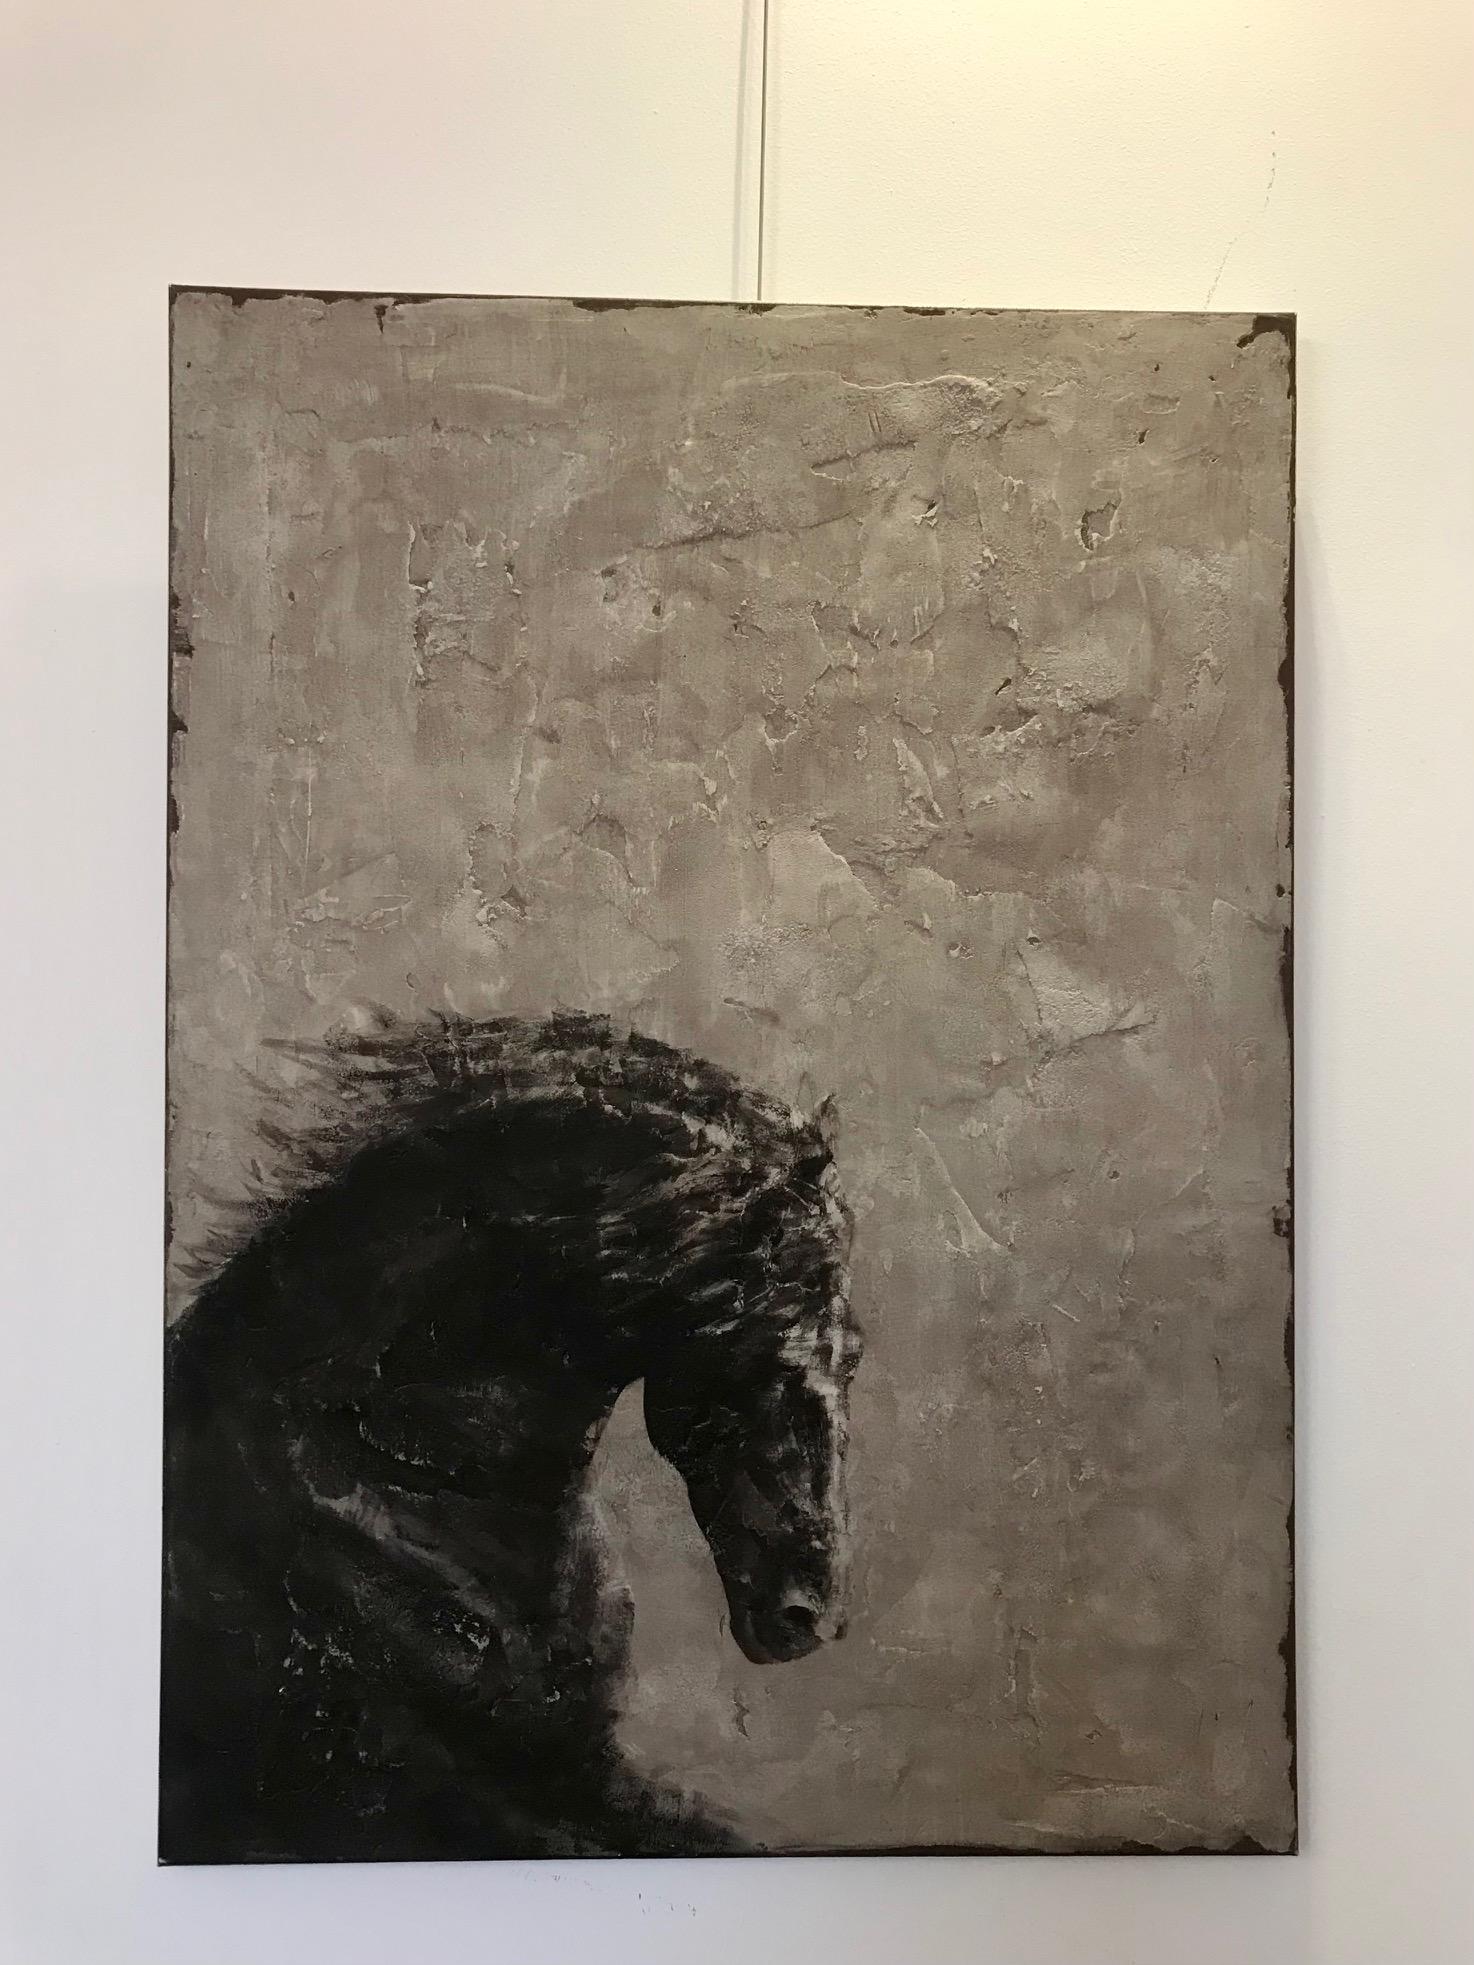 ''Black Horse' Dutch Contemporary Fresco Painting with a Horse 2